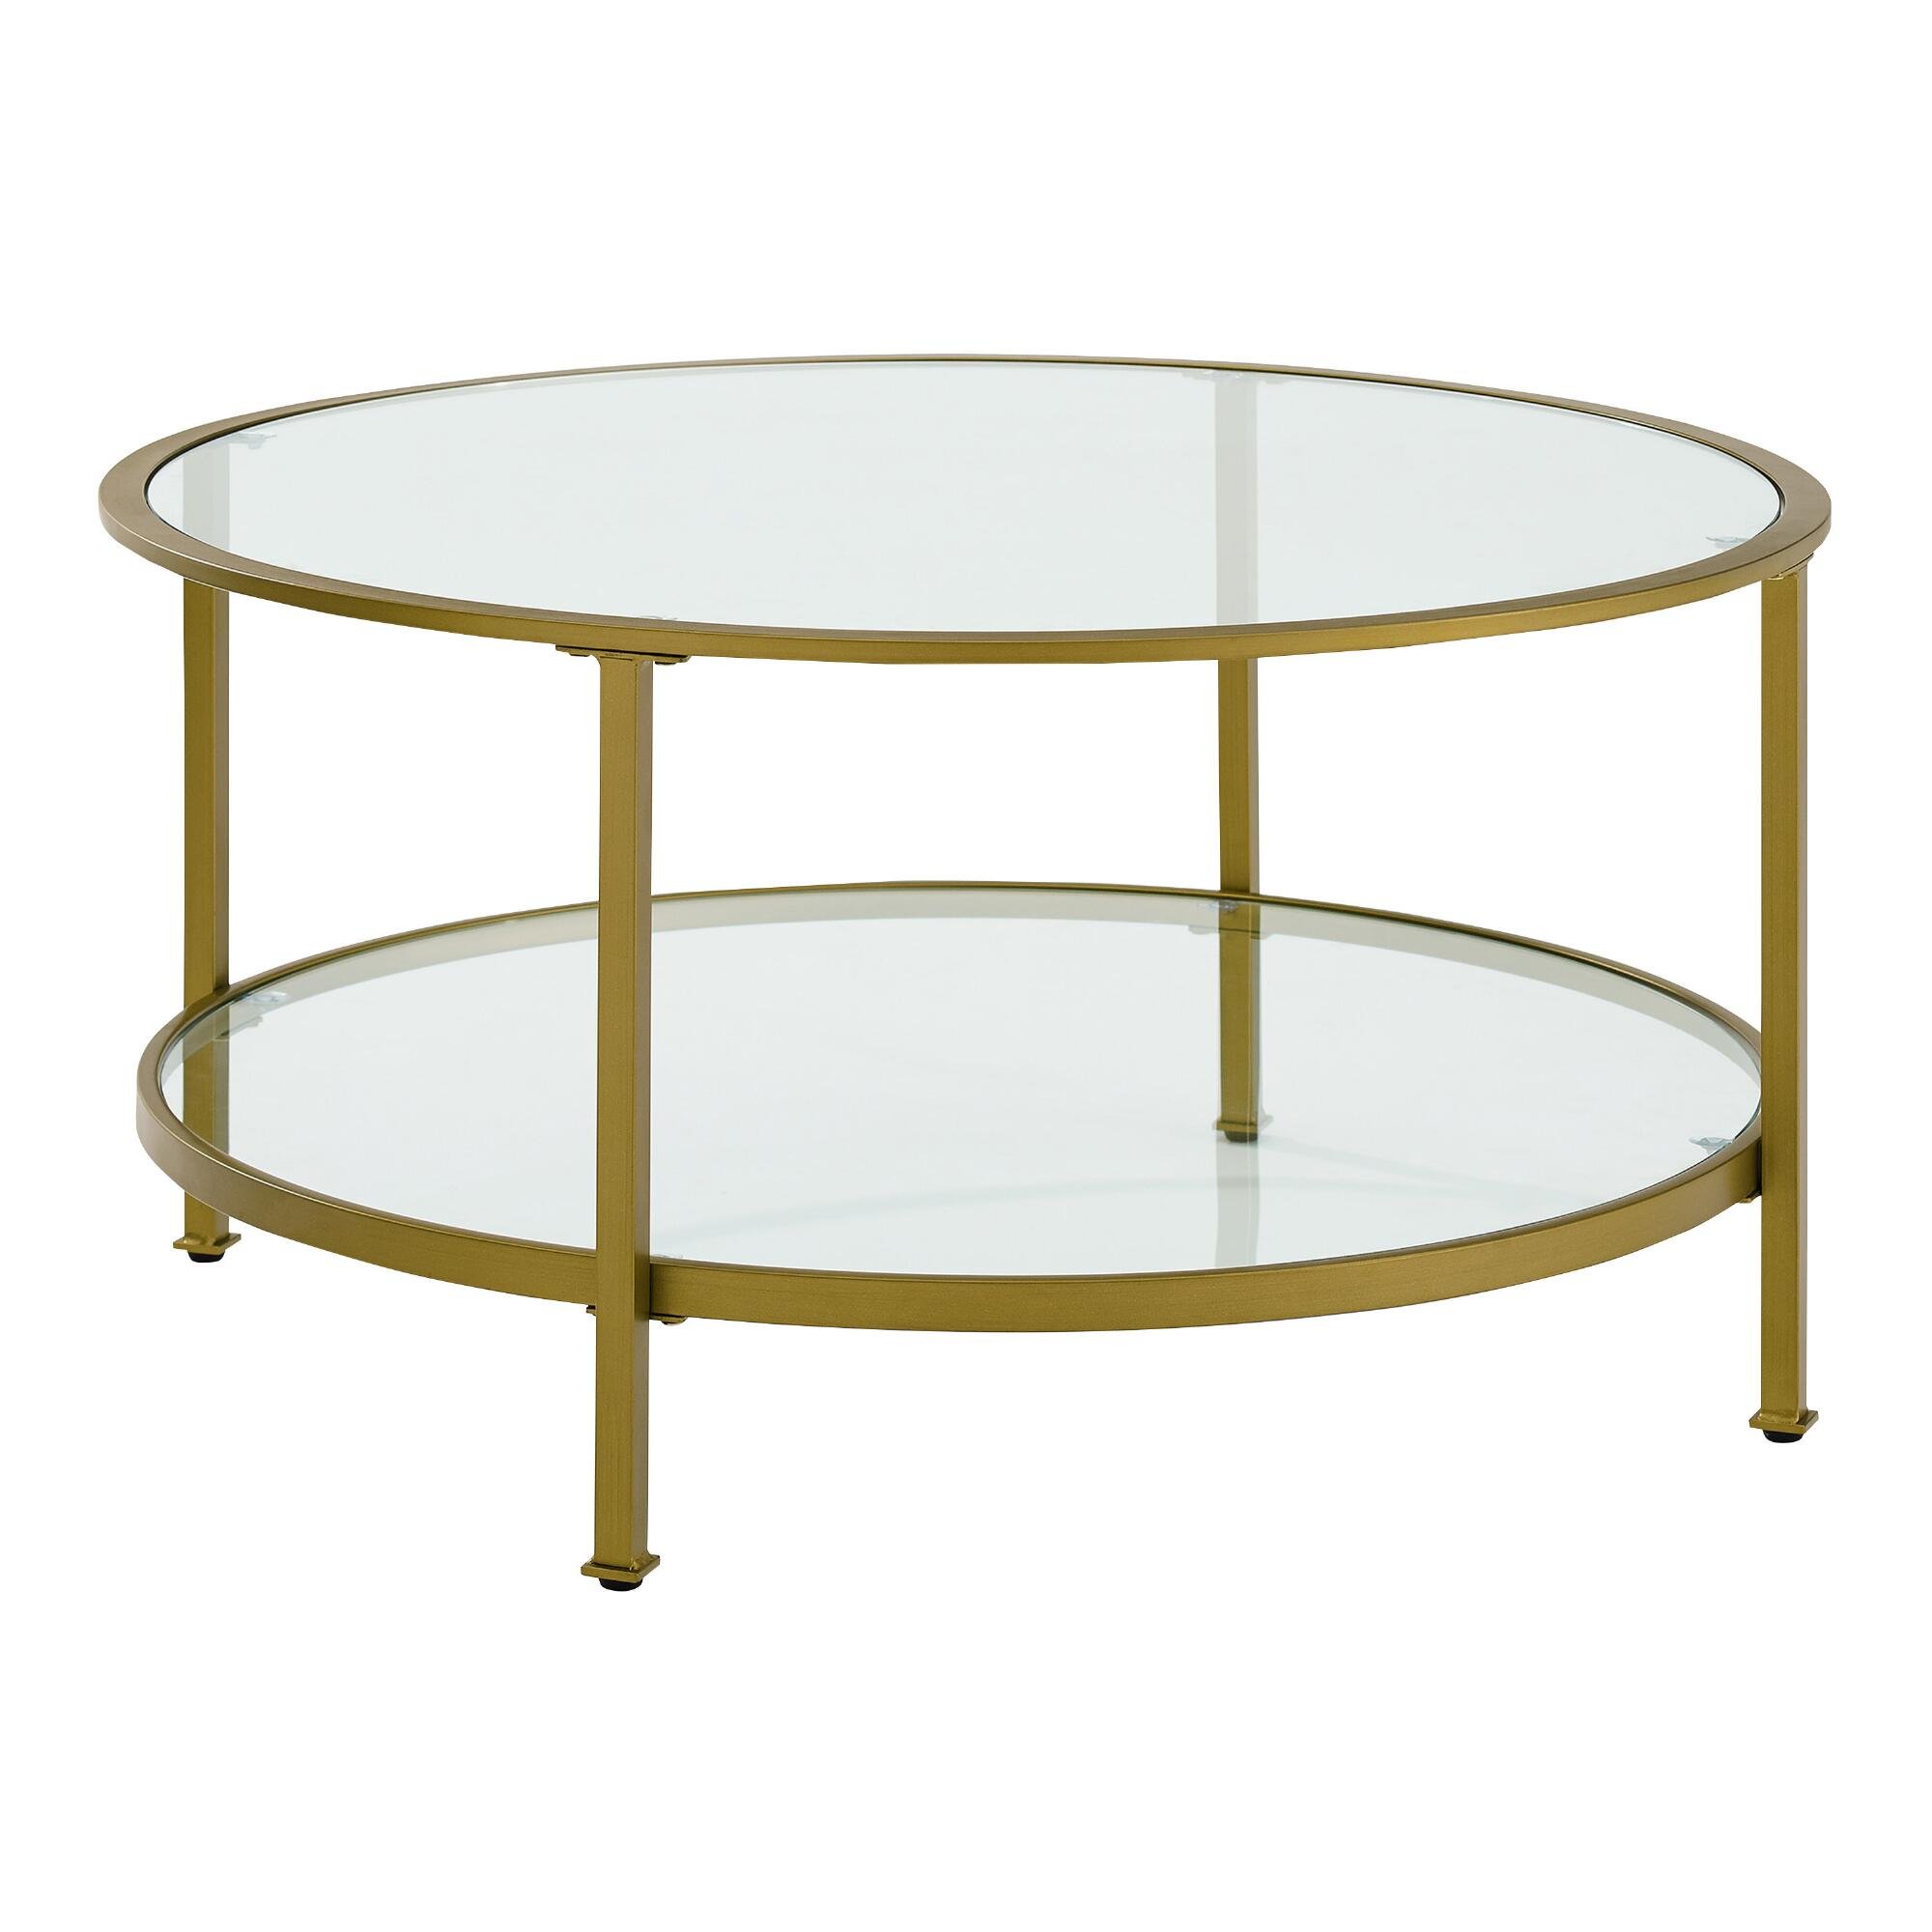 Round Metal And Glass Milayan Coffee Table With Shelf - World Market - $429.99